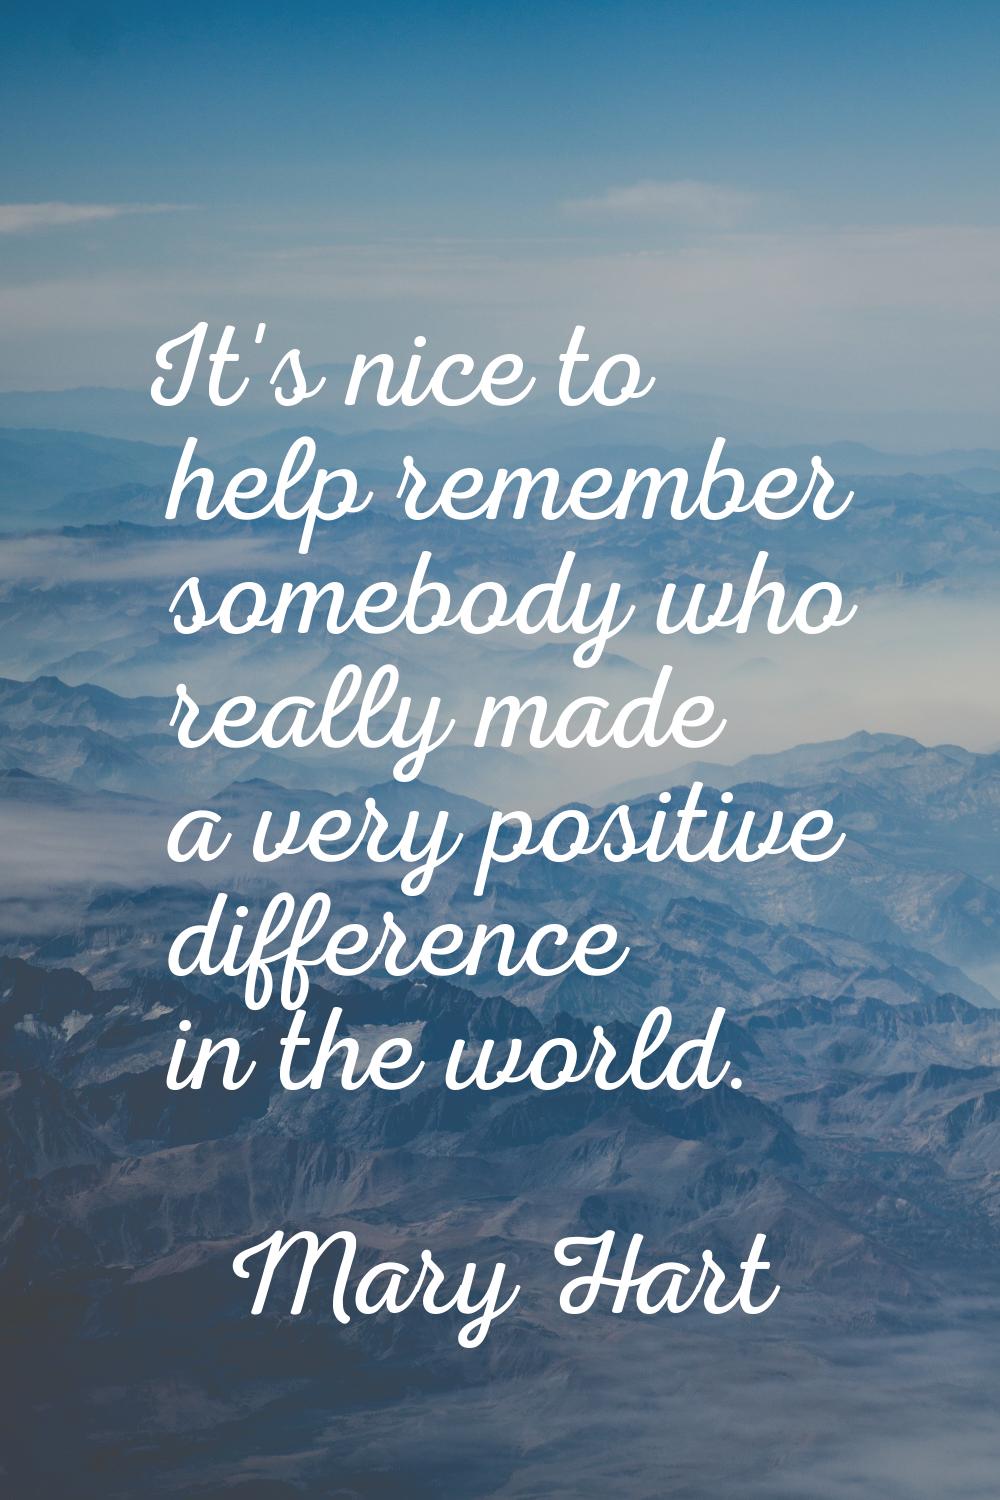 It's nice to help remember somebody who really made a very positive difference in the world.